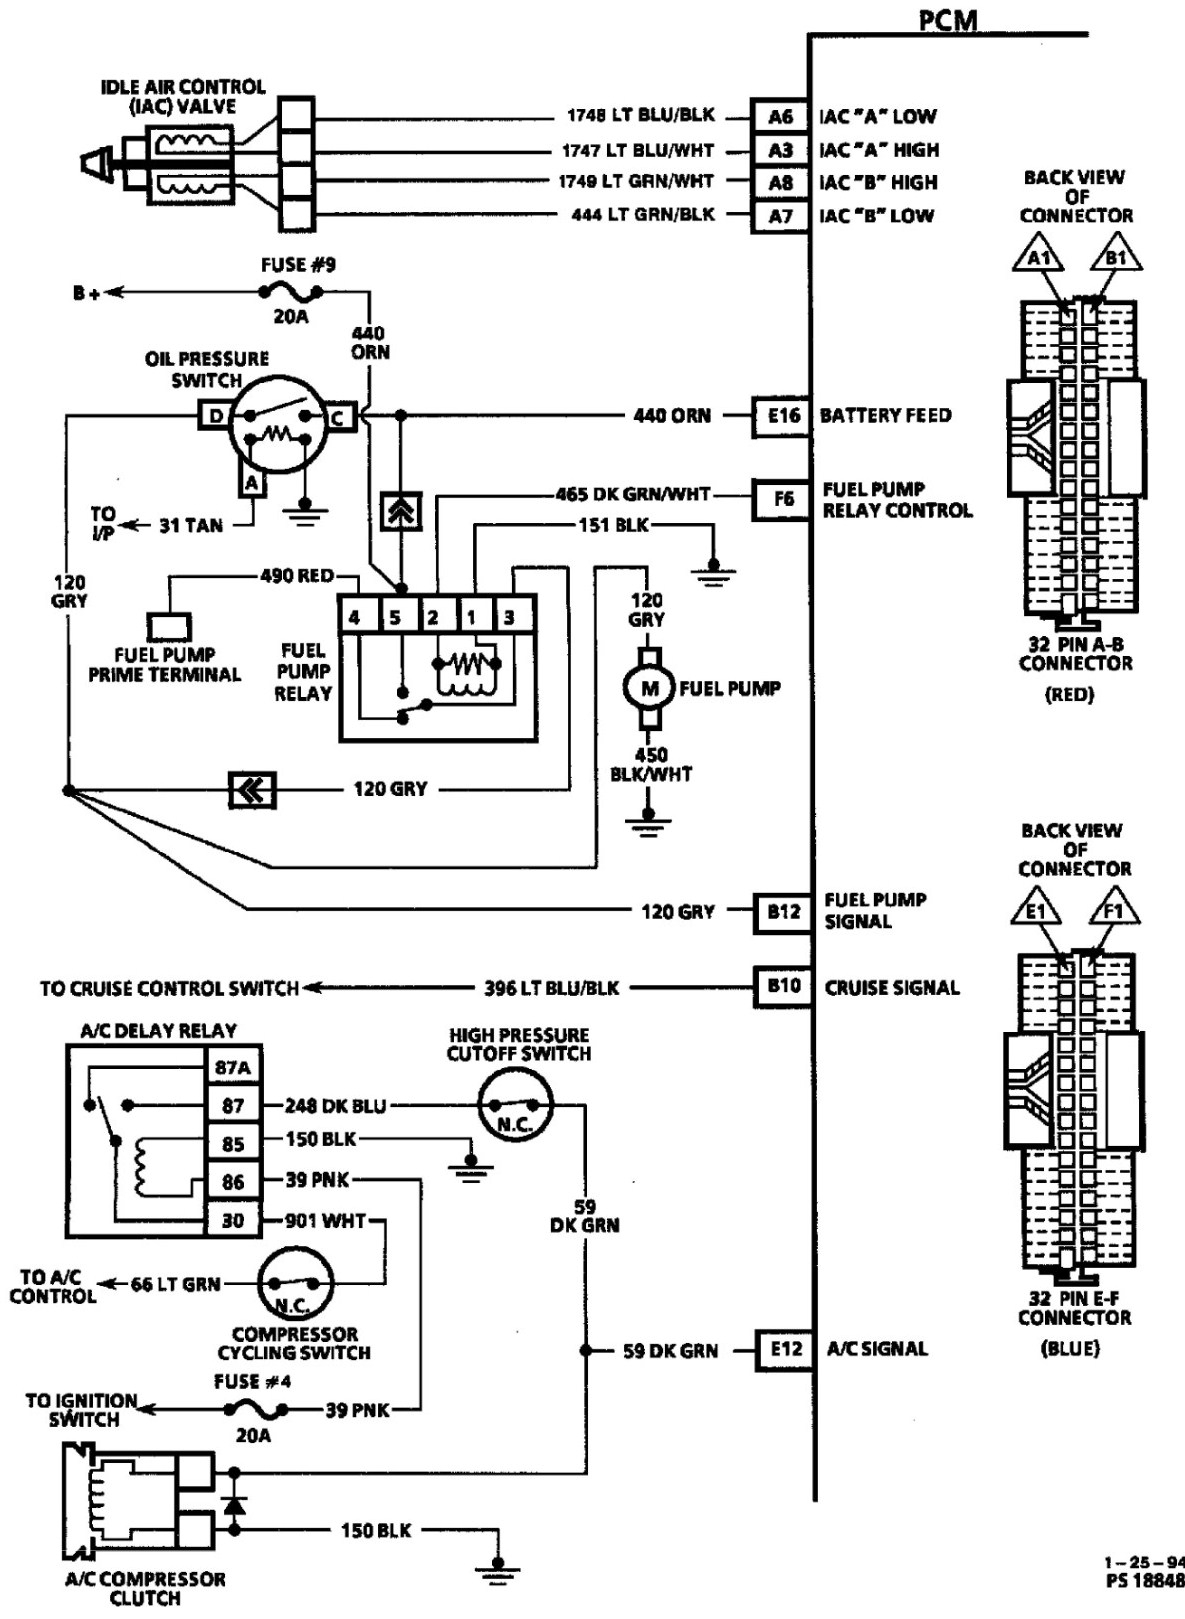 Wiring Diagram For Gm Fuel Pump Wiring Diagram And Schematic